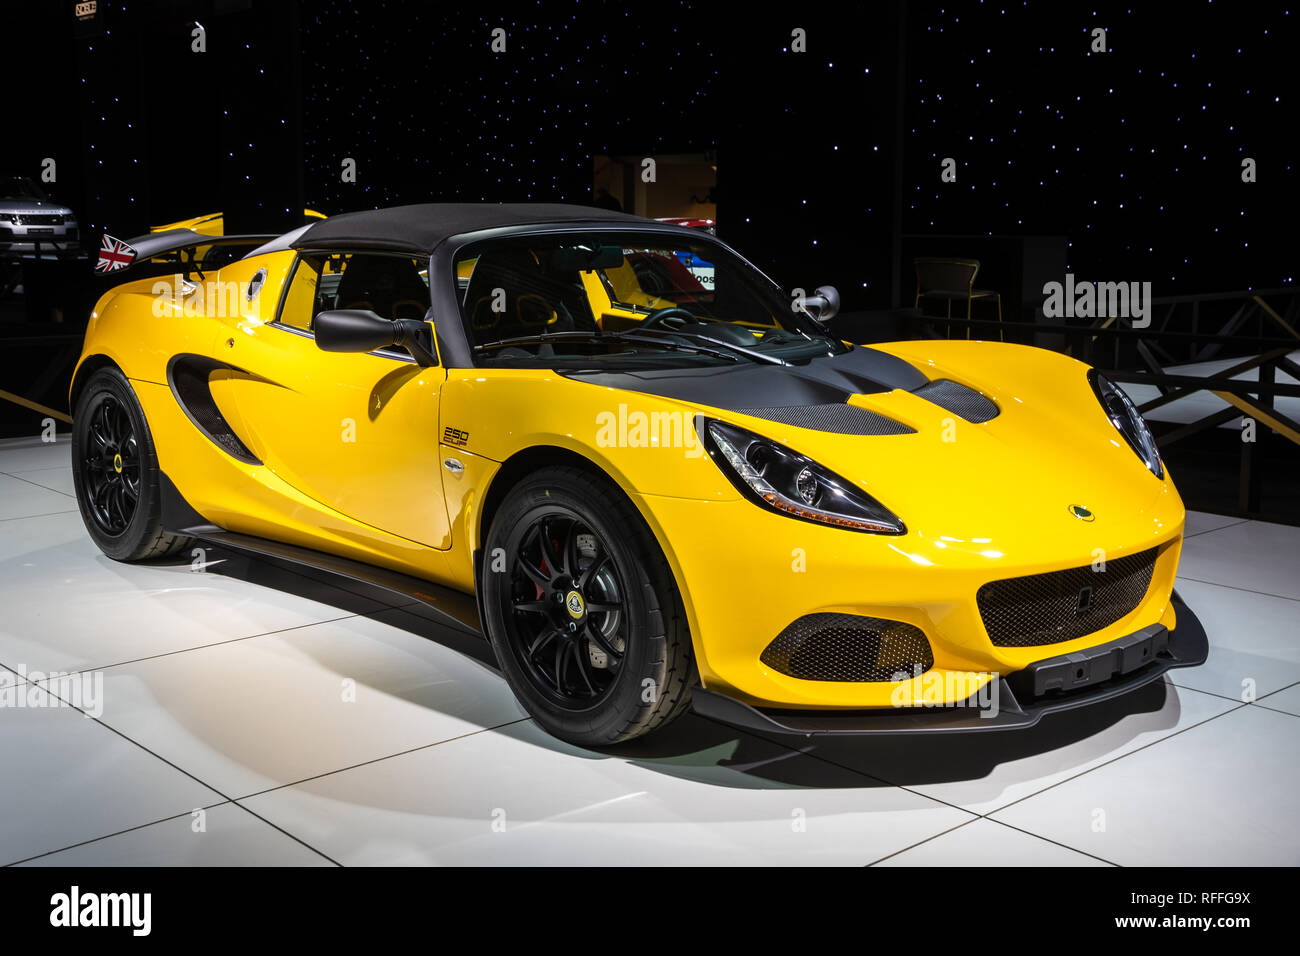 BRUSSELS - JAN 18, 2019: Lotus Elise Cup 250 sports car showcased at the 97th Brussels Motor Show 2019 Autosalon. Stock Photo